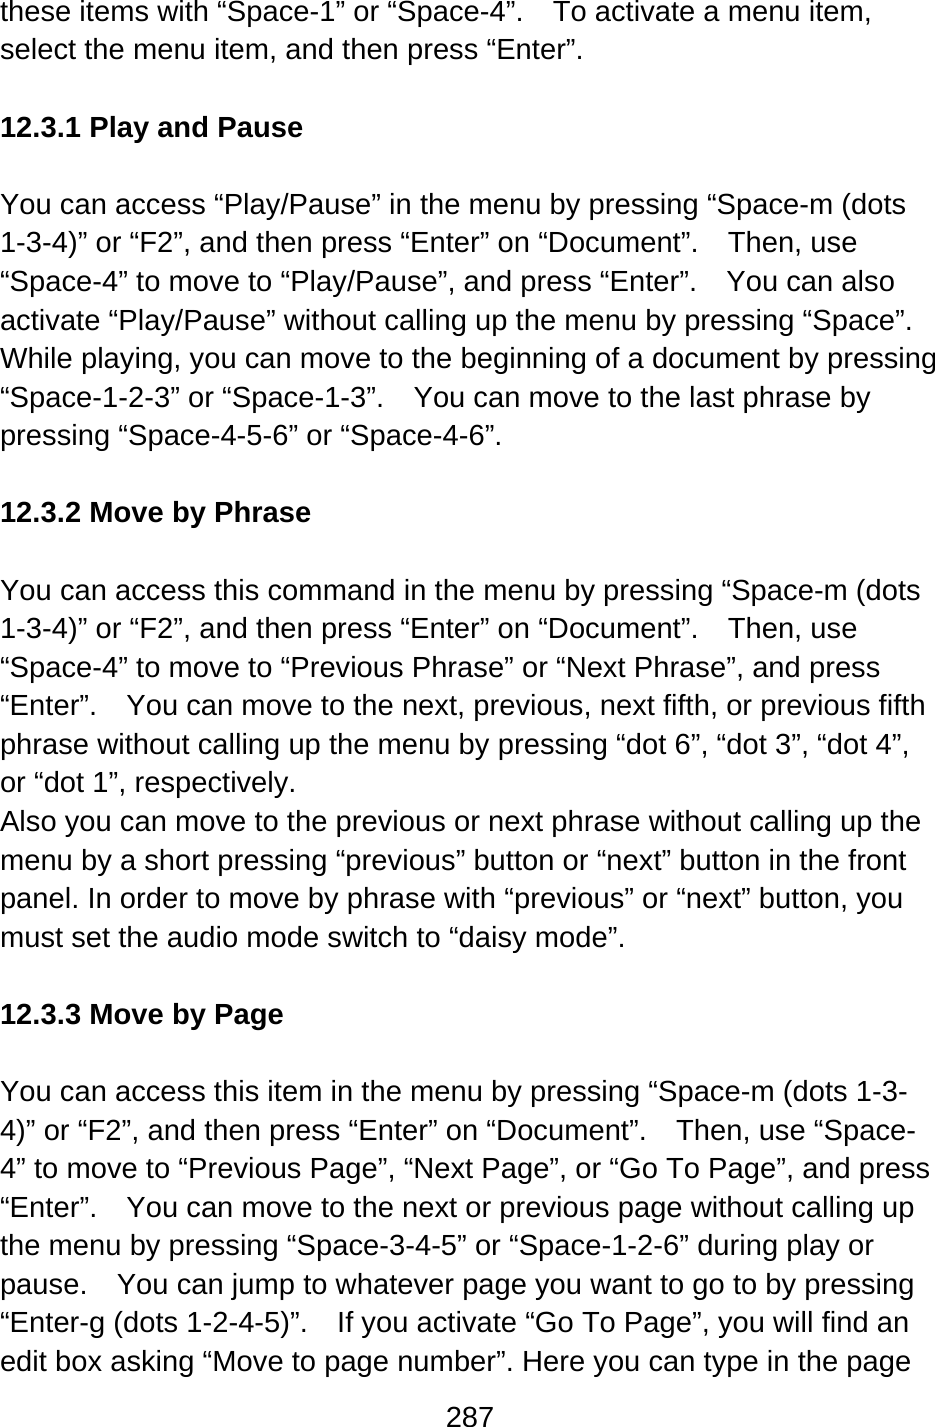 287  these items with “Space-1” or “Space-4”.    To activate a menu item, select the menu item, and then press “Enter”.  12.3.1 Play and Pause  You can access “Play/Pause” in the menu by pressing “Space-m (dots 1-3-4)” or “F2”, and then press “Enter” on “Document”.    Then, use “Space-4” to move to “Play/Pause”, and press “Enter”.    You can also activate “Play/Pause” without calling up the menu by pressing “Space”.   While playing, you can move to the beginning of a document by pressing “Space-1-2-3” or “Space-1-3”.  You can move to the last phrase by pressing “Space-4-5-6” or “Space-4-6”.  12.3.2 Move by Phrase  You can access this command in the menu by pressing “Space-m (dots 1-3-4)” or “F2”, and then press “Enter” on “Document”.    Then, use “Space-4” to move to “Previous Phrase” or “Next Phrase”, and press “Enter”.    You can move to the next, previous, next fifth, or previous fifth phrase without calling up the menu by pressing “dot 6”, “dot 3”, “dot 4”, or “dot 1”, respectively. Also you can move to the previous or next phrase without calling up the menu by a short pressing “previous” button or “next” button in the front panel. In order to move by phrase with “previous” or “next” button, you must set the audio mode switch to “daisy mode”.  12.3.3 Move by Page  You can access this item in the menu by pressing “Space-m (dots 1-3-4)” or “F2”, and then press “Enter” on “Document”.    Then, use “Space-4” to move to “Previous Page”, “Next Page”, or “Go To Page”, and press “Enter”.    You can move to the next or previous page without calling up the menu by pressing “Space-3-4-5” or “Space-1-2-6” during play or pause.    You can jump to whatever page you want to go to by pressing “Enter-g (dots 1-2-4-5)”.  If you activate “Go To Page”, you will find an edit box asking “Move to page number”. Here you can type in the page 